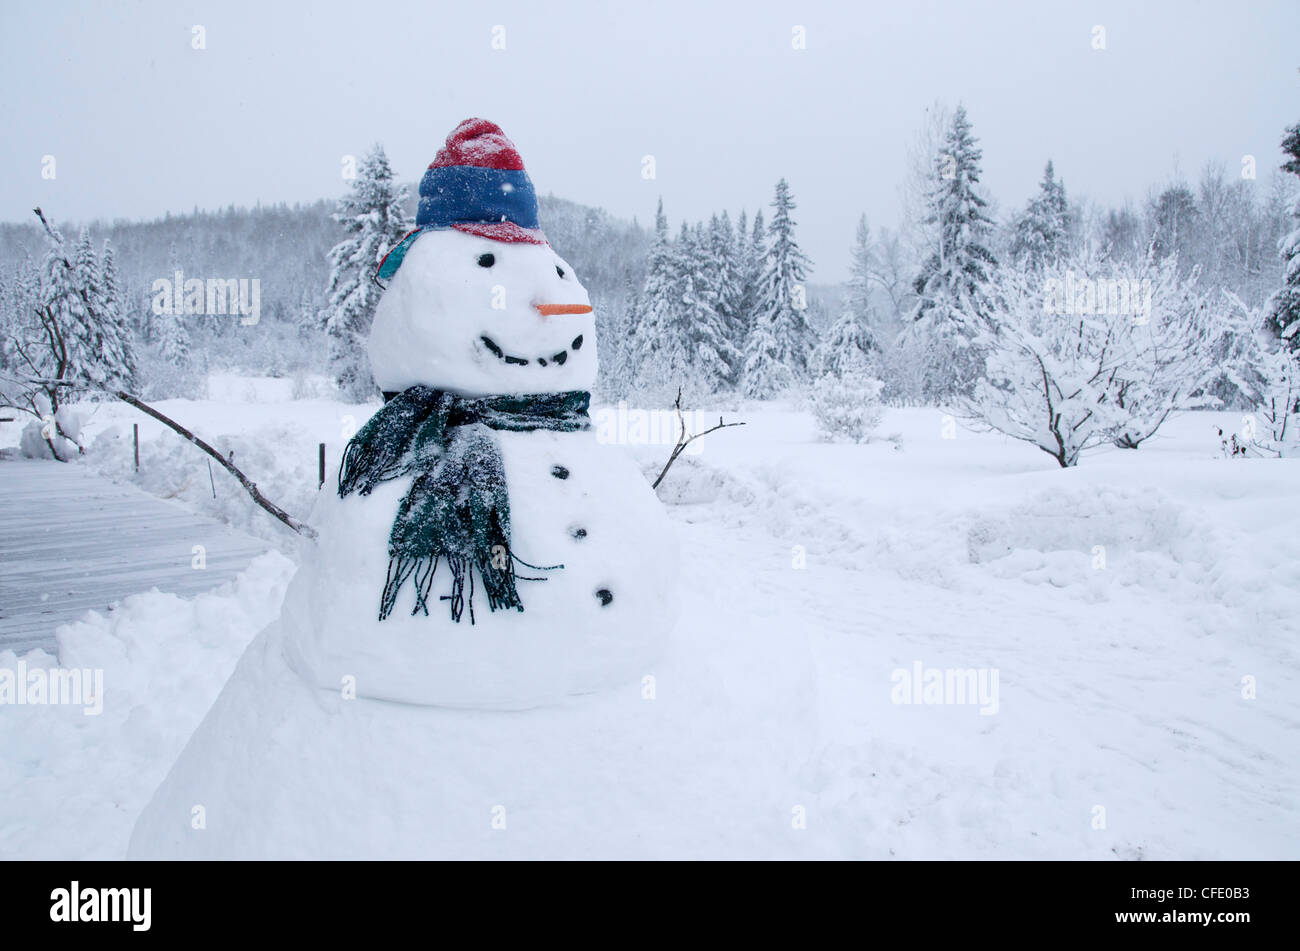 Snowman in front of winter forest. Northern Ontario, Canada. Model Released :-) Stock Photo